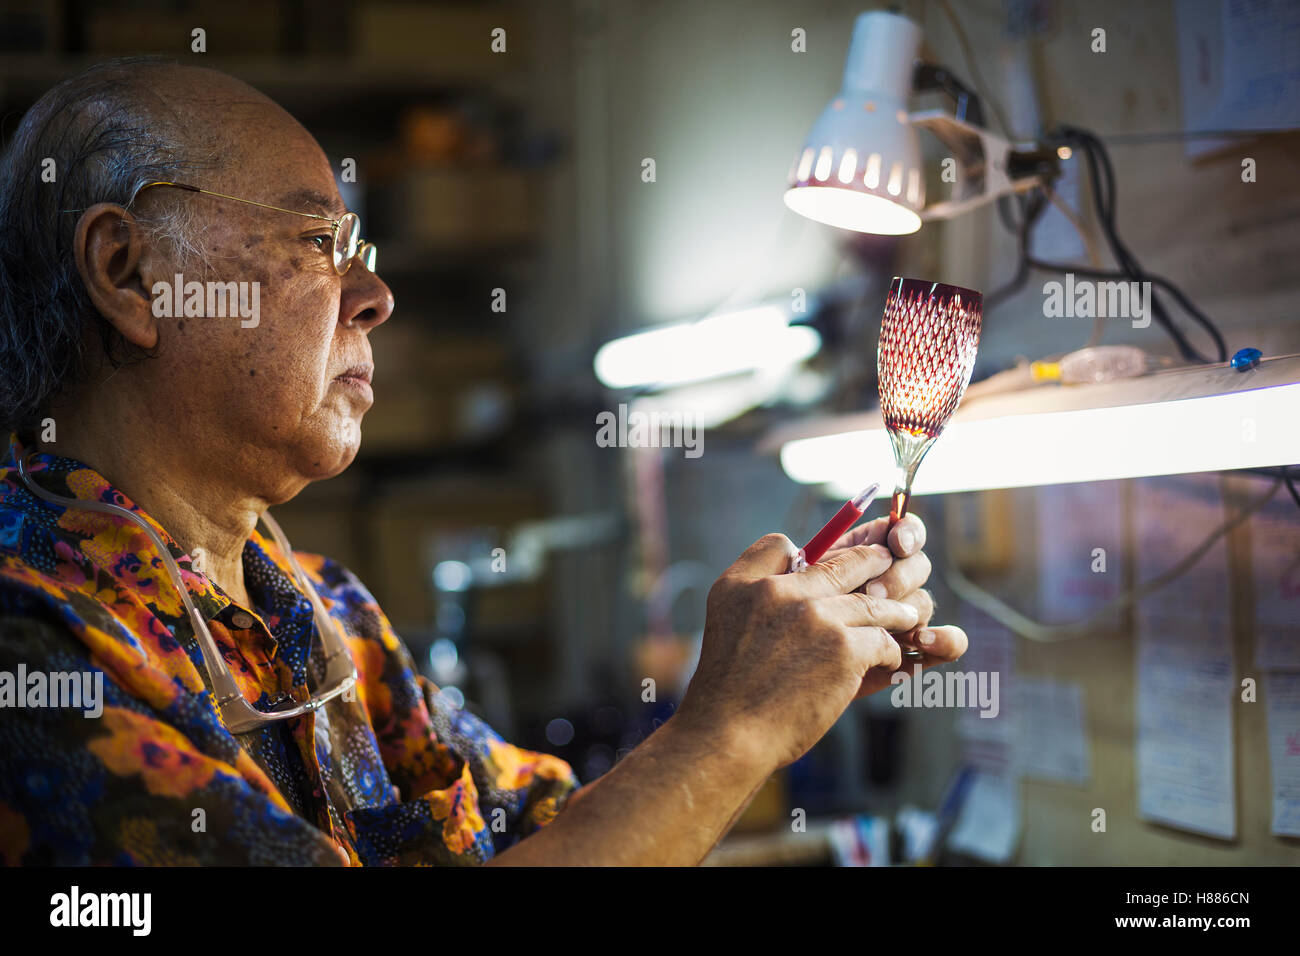 glass maker's studio workshop, man inspecting red wine glass with cut glass decoration against the light. Stock Photo